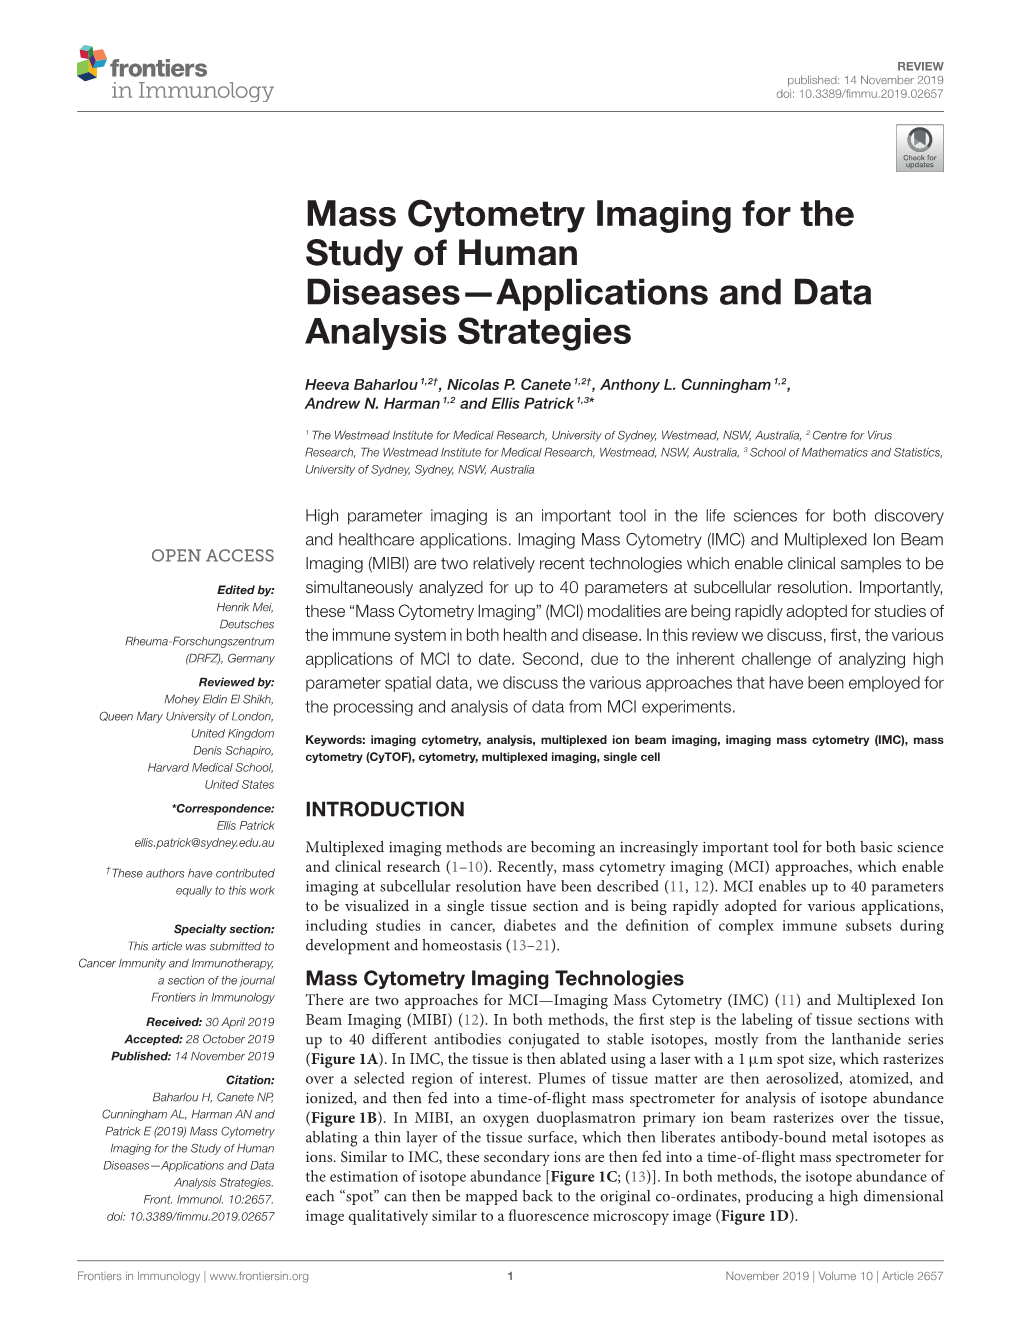 Mass Cytometry Imaging for the Study of Human Diseases—Applications and Data Analysis Strategies